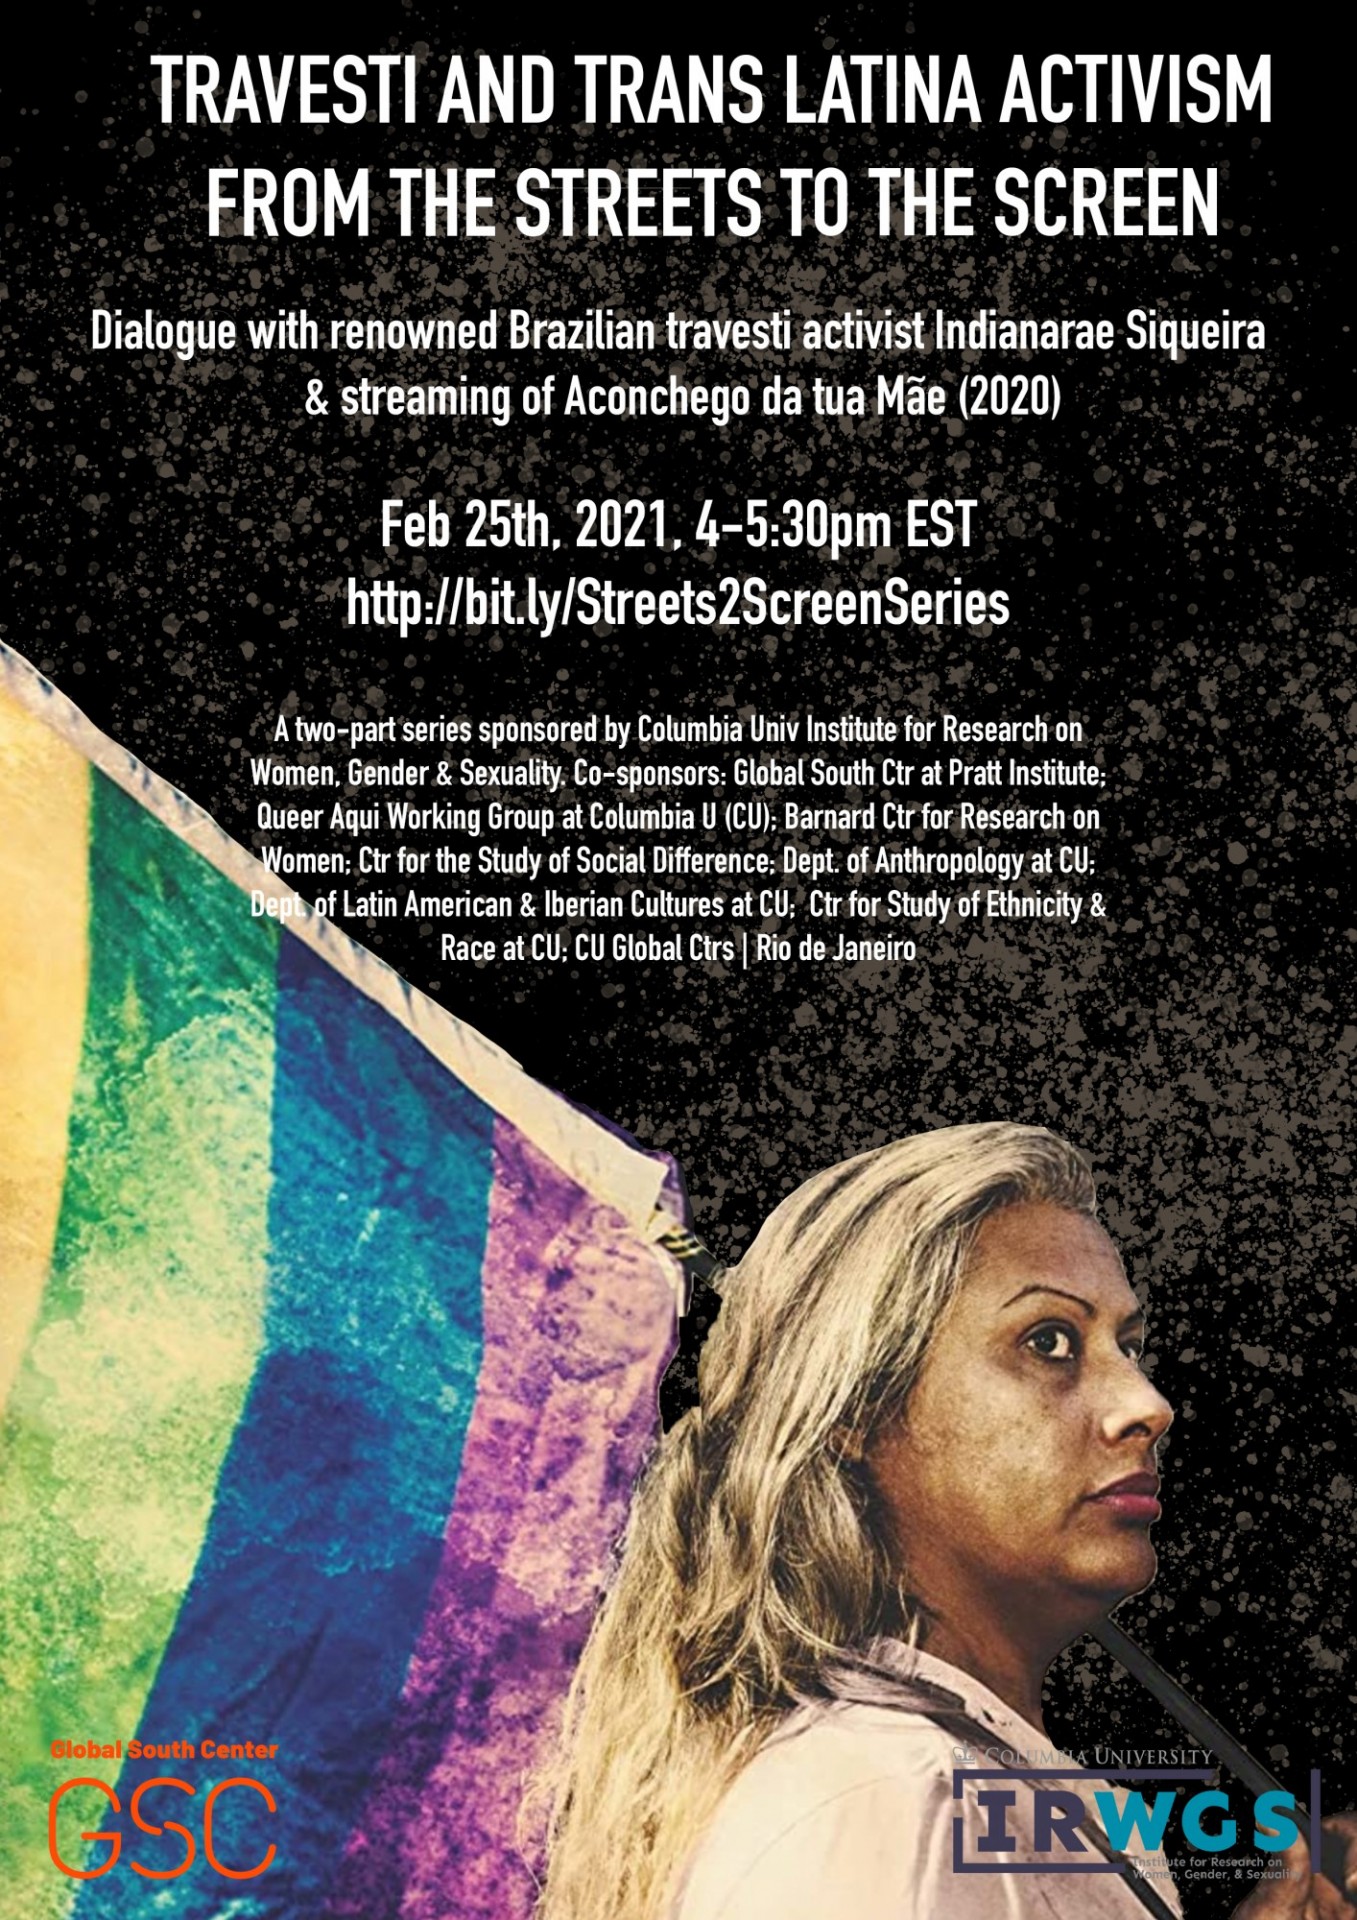 Flyer for February 25th event Travesti and Trans Latina Activism - From the Streets to the Screen - Indianarae Siqueira